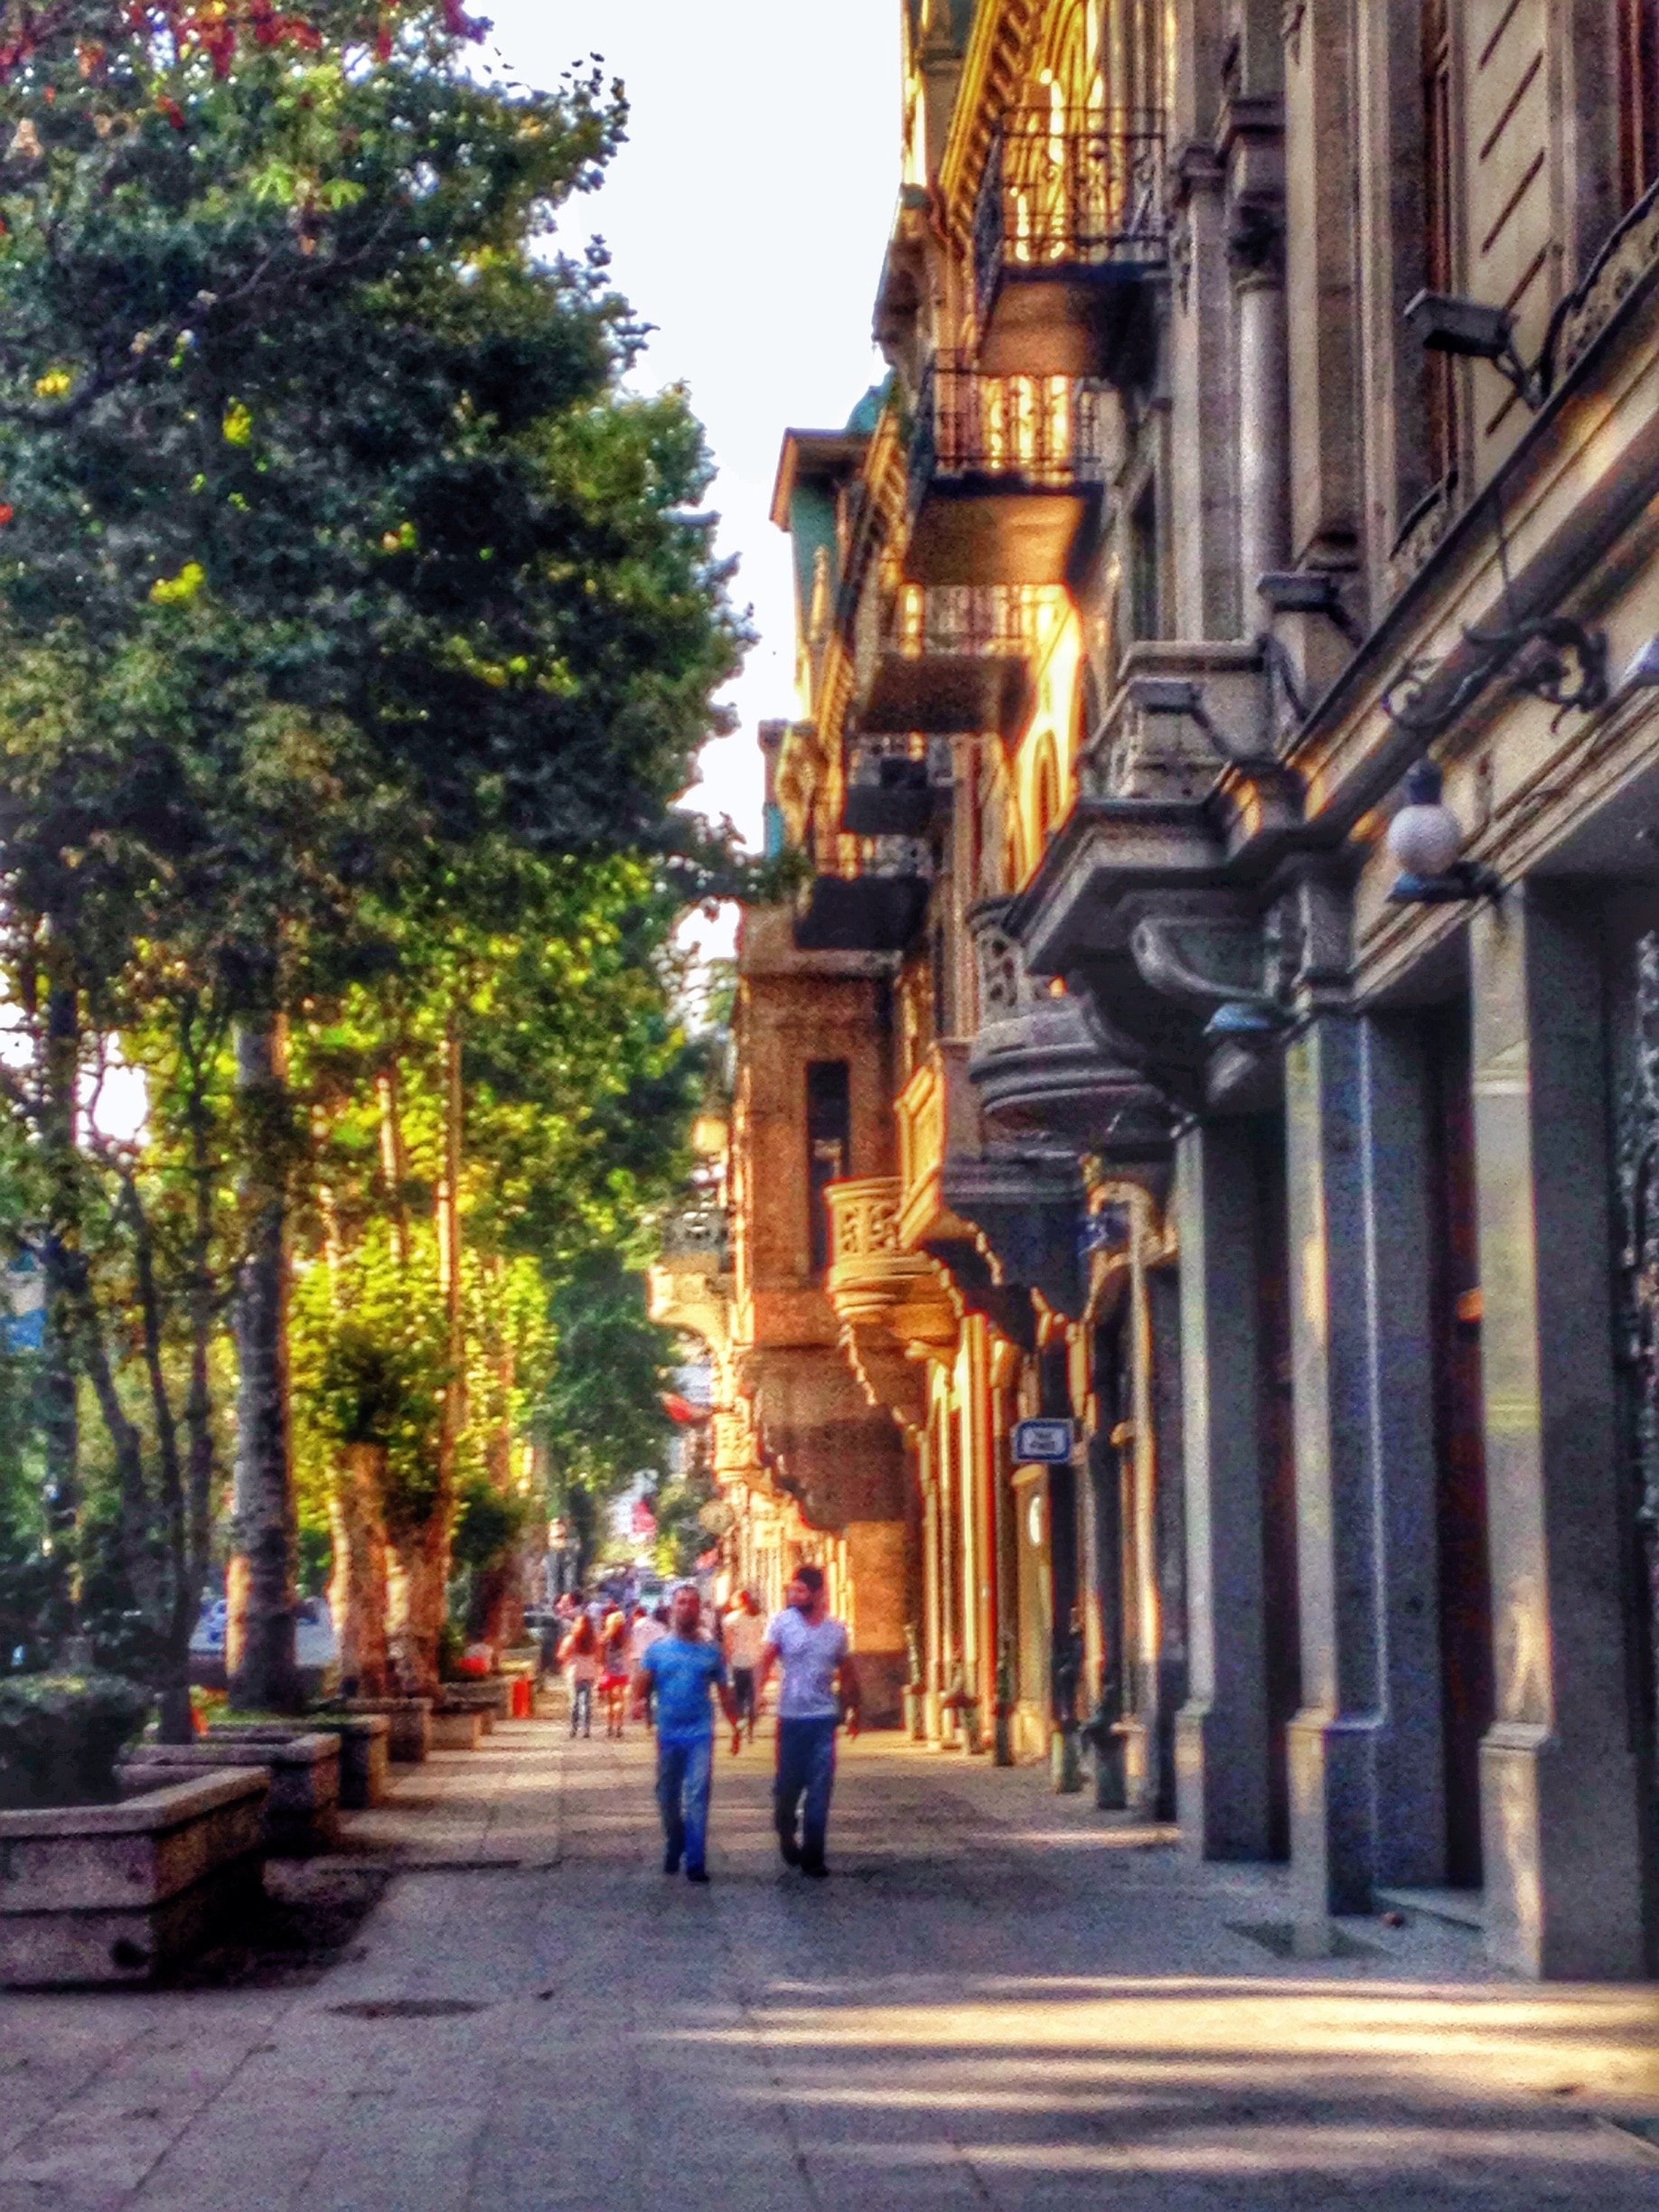 Walking along Rustaveli Ave. in downtown Tbilisi which leads to Freedom Square. All along the strip are shops and museums but also quite notable in this area is the contrast in architecture between pre and post soviet rule. 